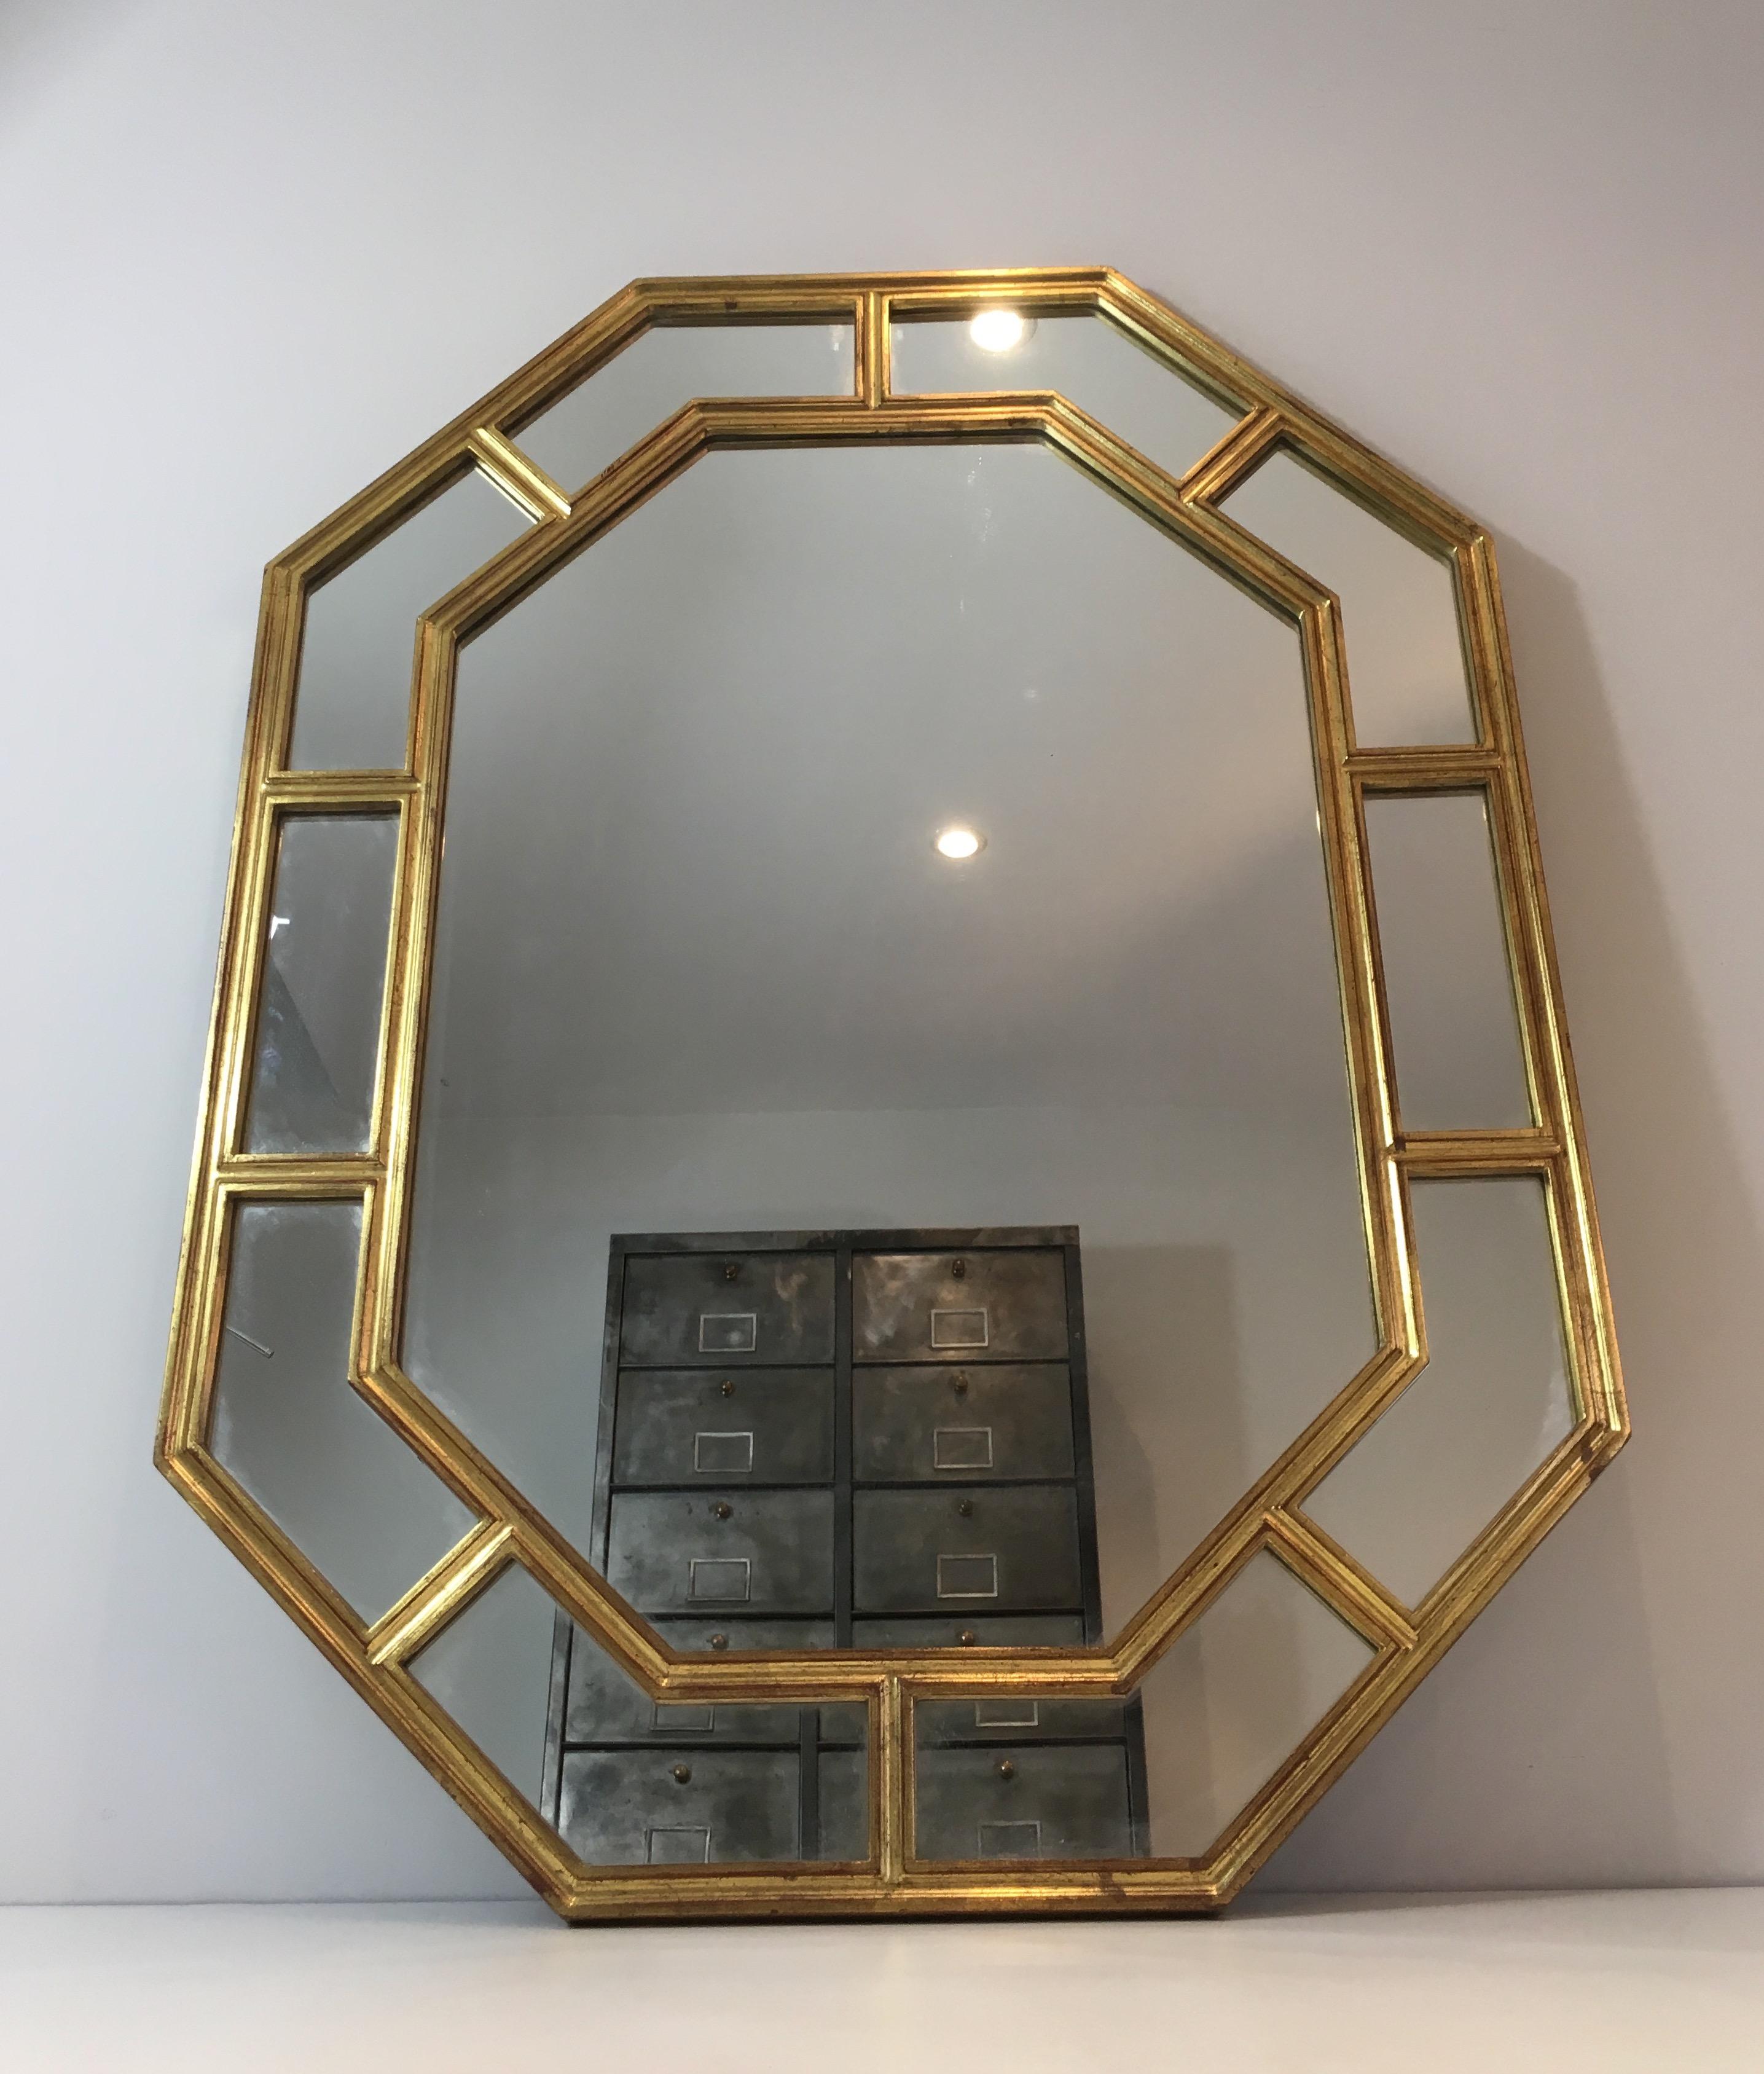 This octagonal mirror is made of gilt resin and mirrors. This is a French work, circa 1970.